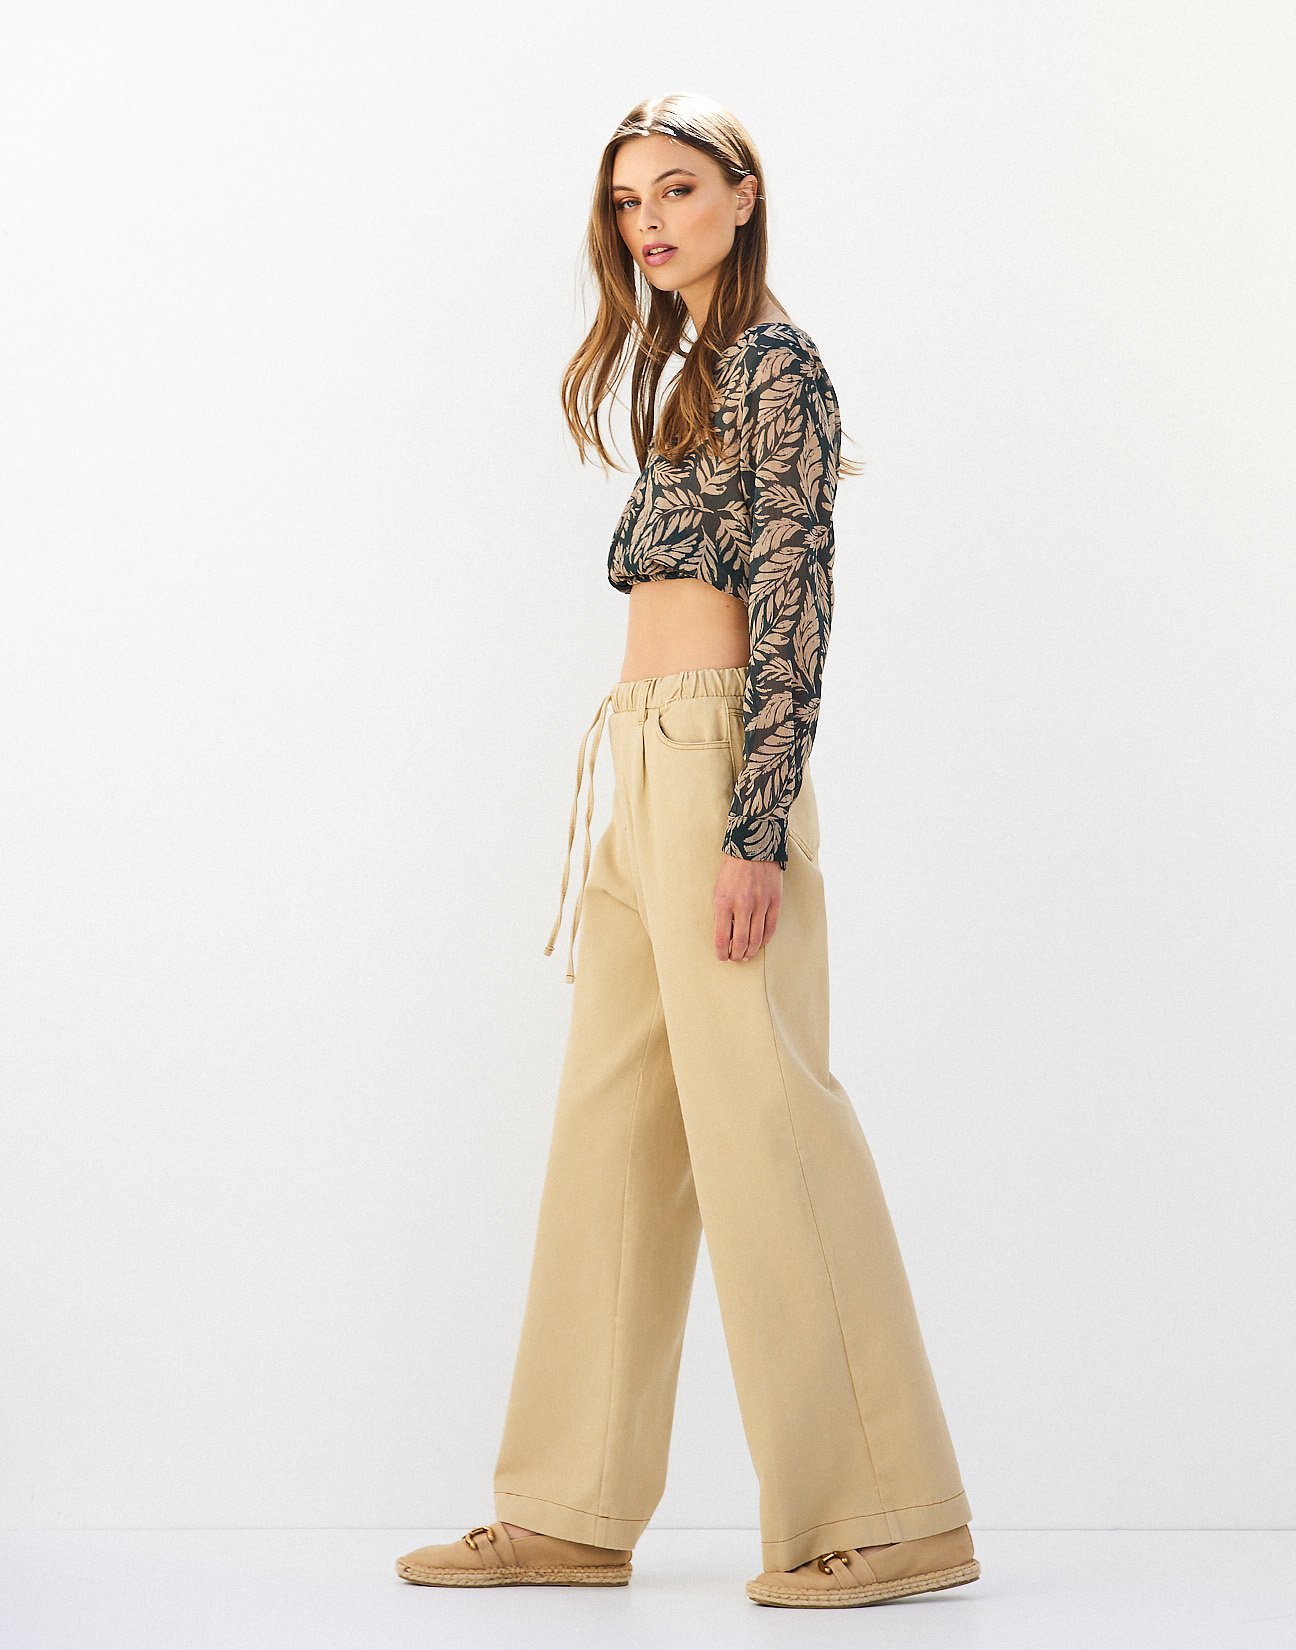 Jeans trousers with elastic waist